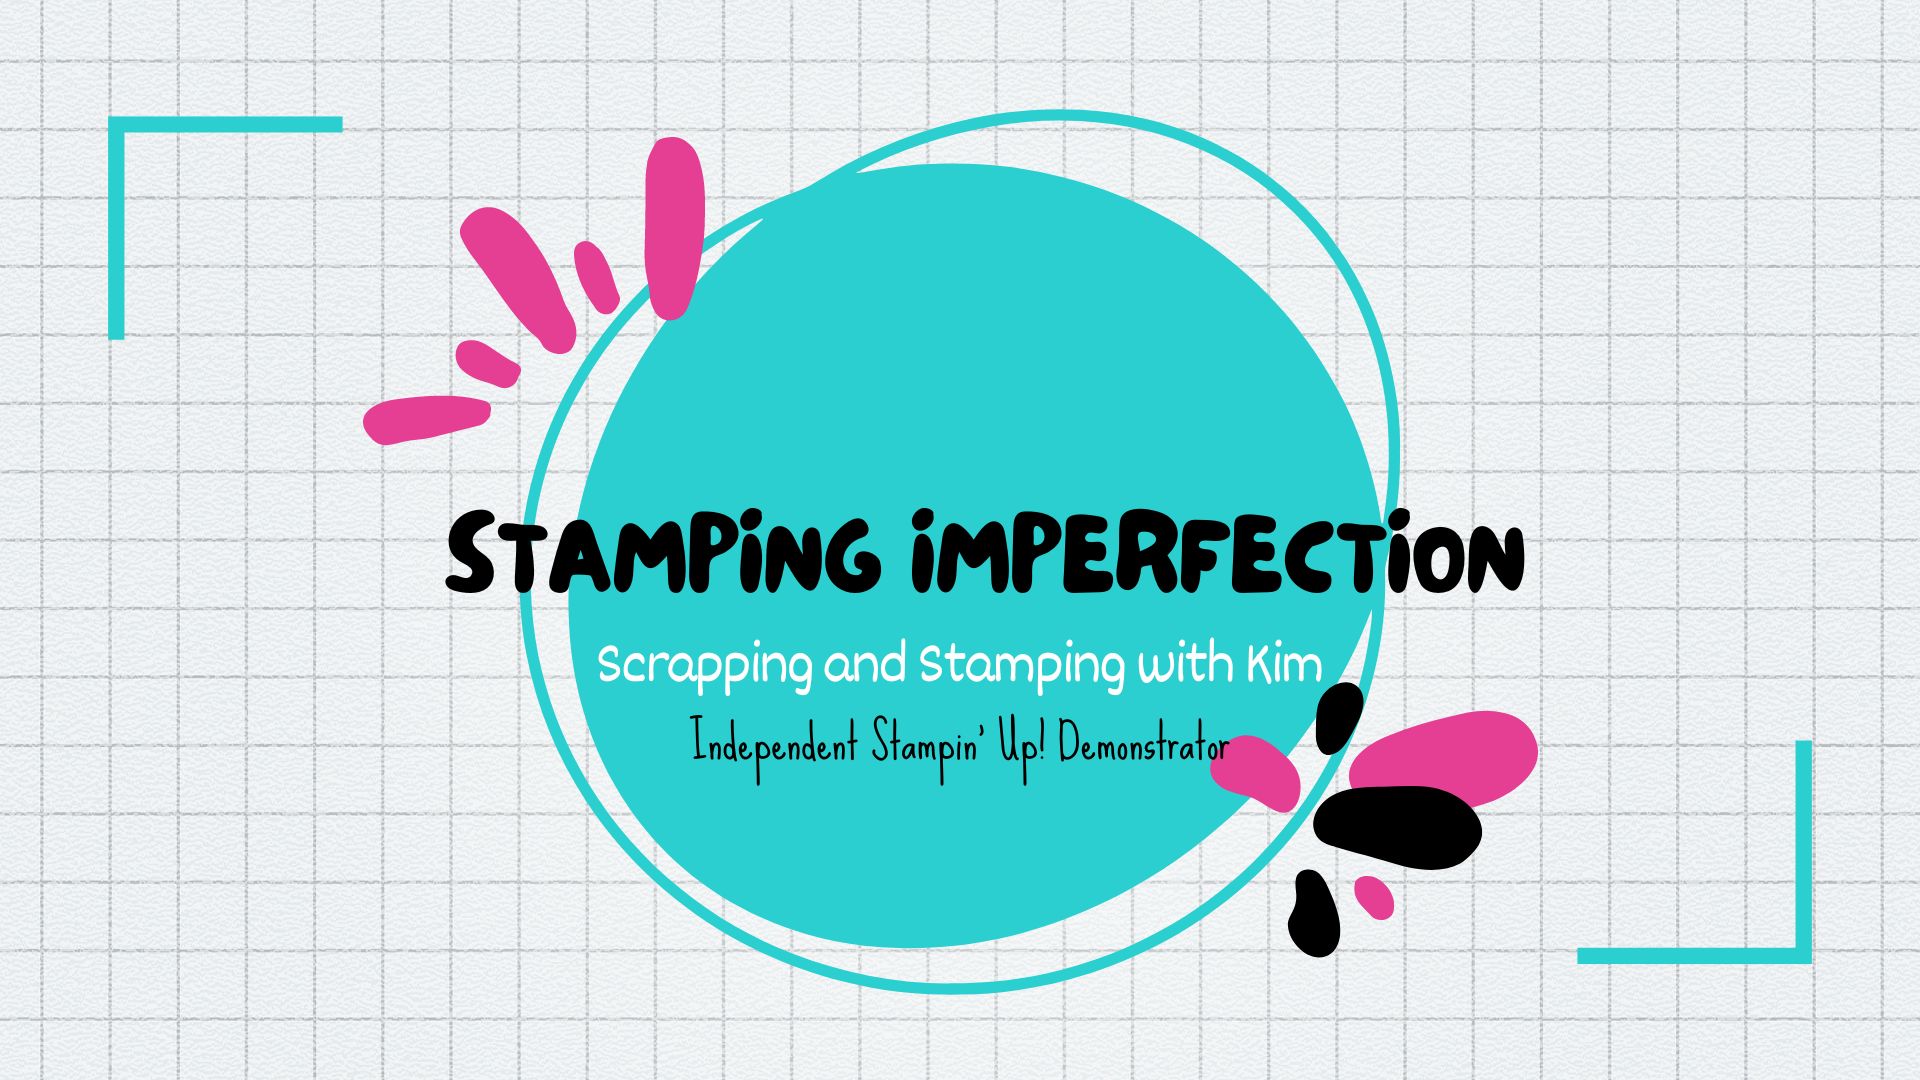 Stamping Imperfection